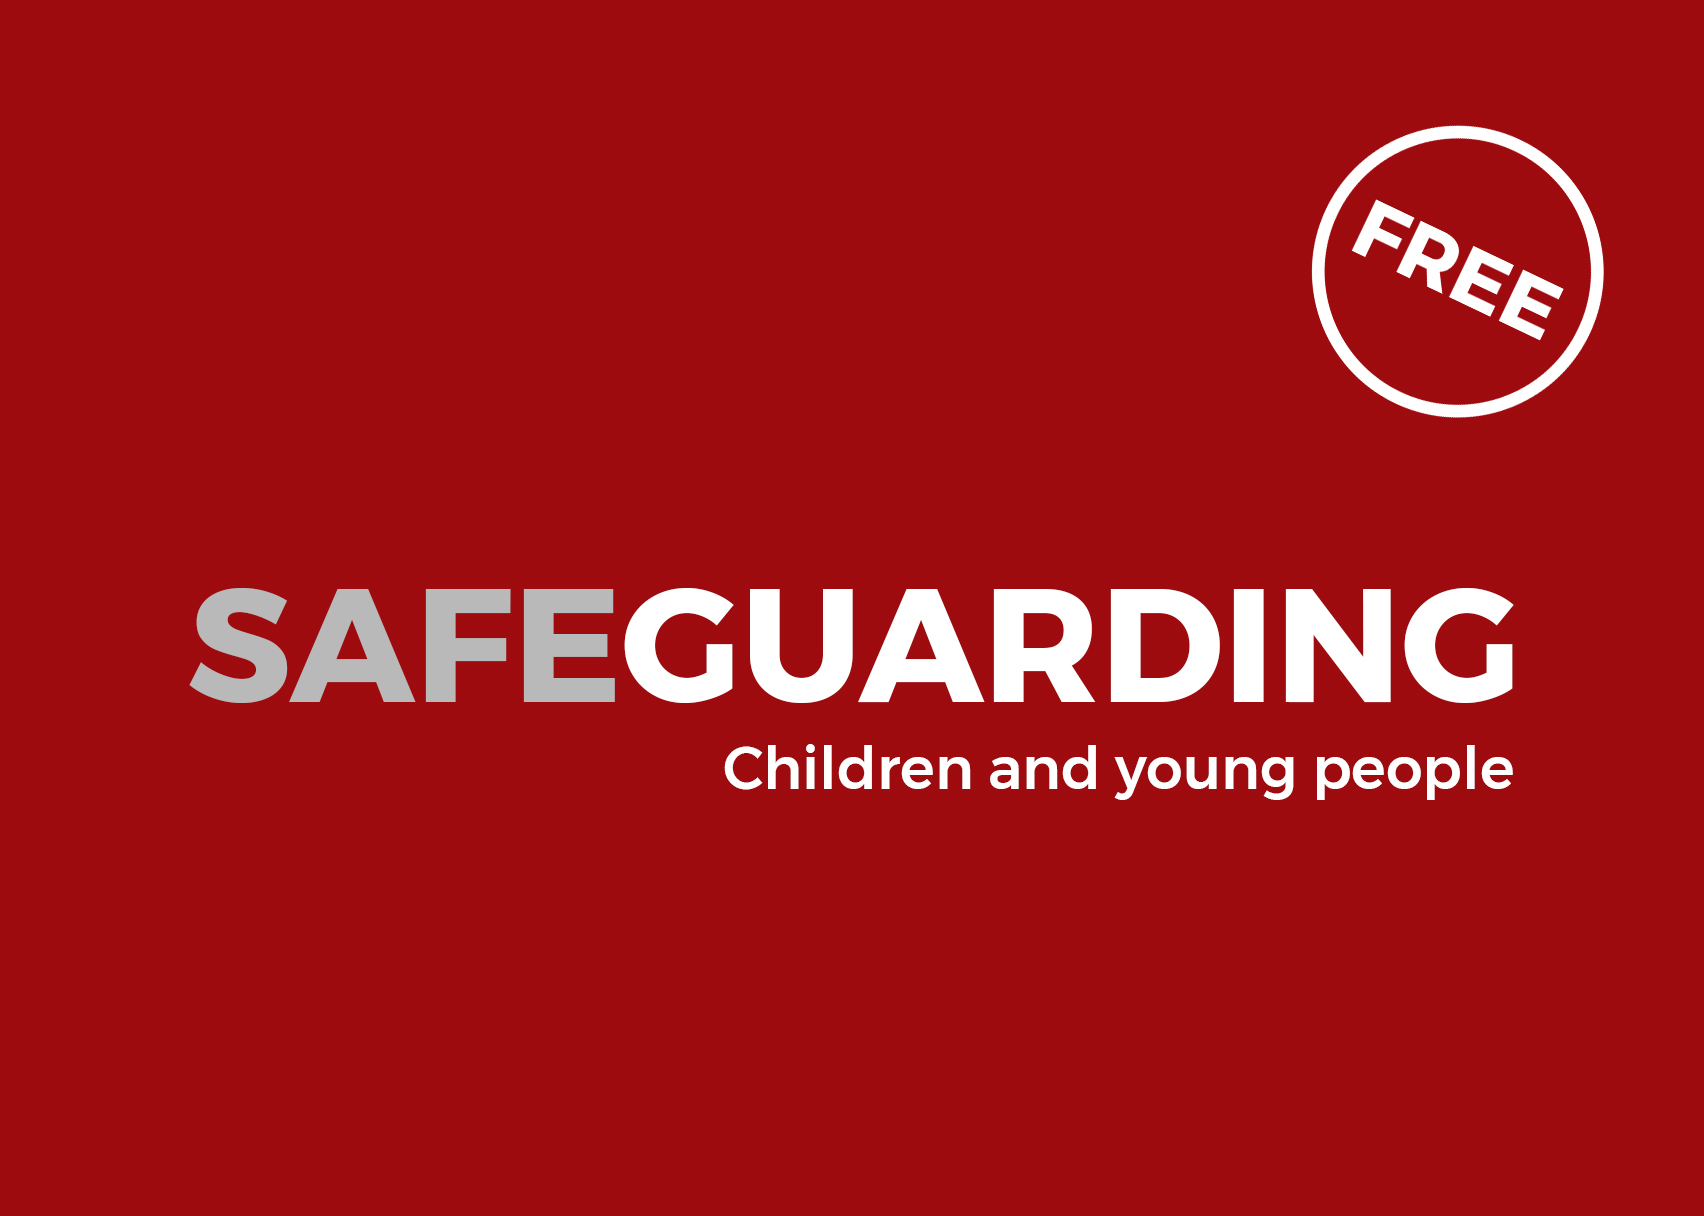 Safeguarding Children and Young People